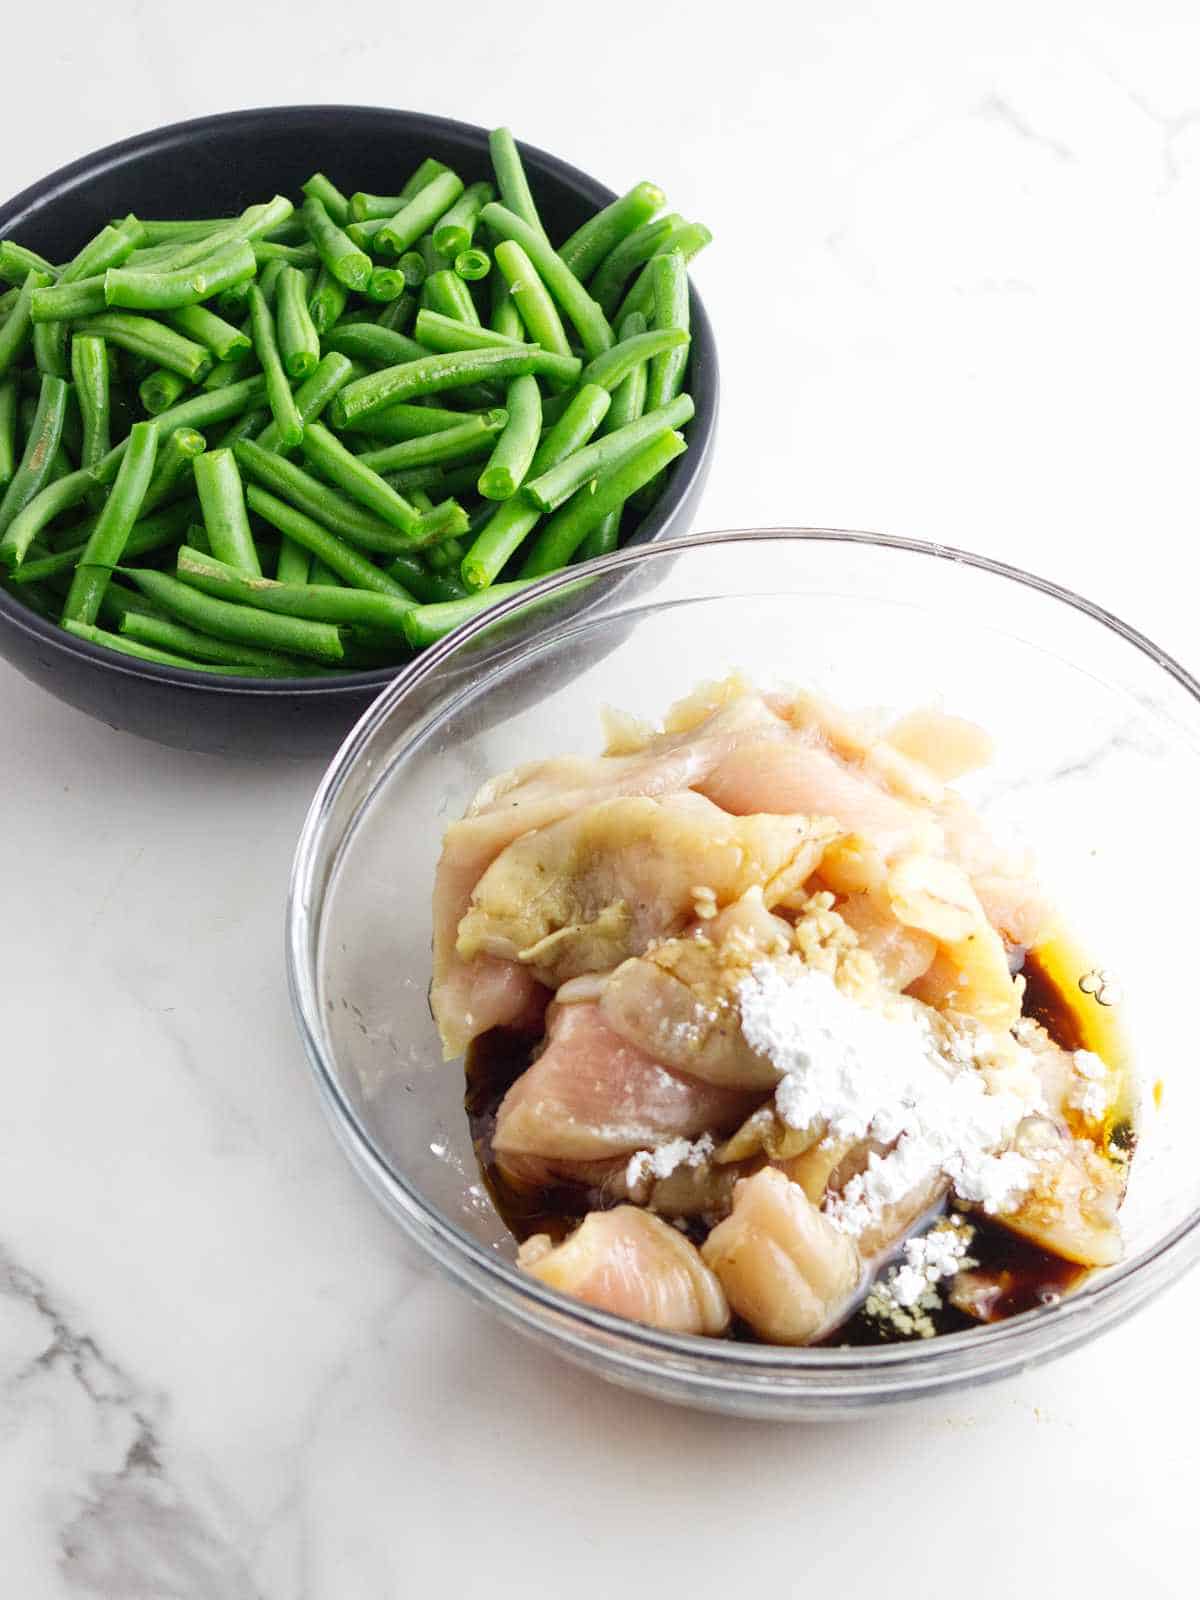 marinating chicken breast in a bowl, with trimmed green beans in a bowl nearby.